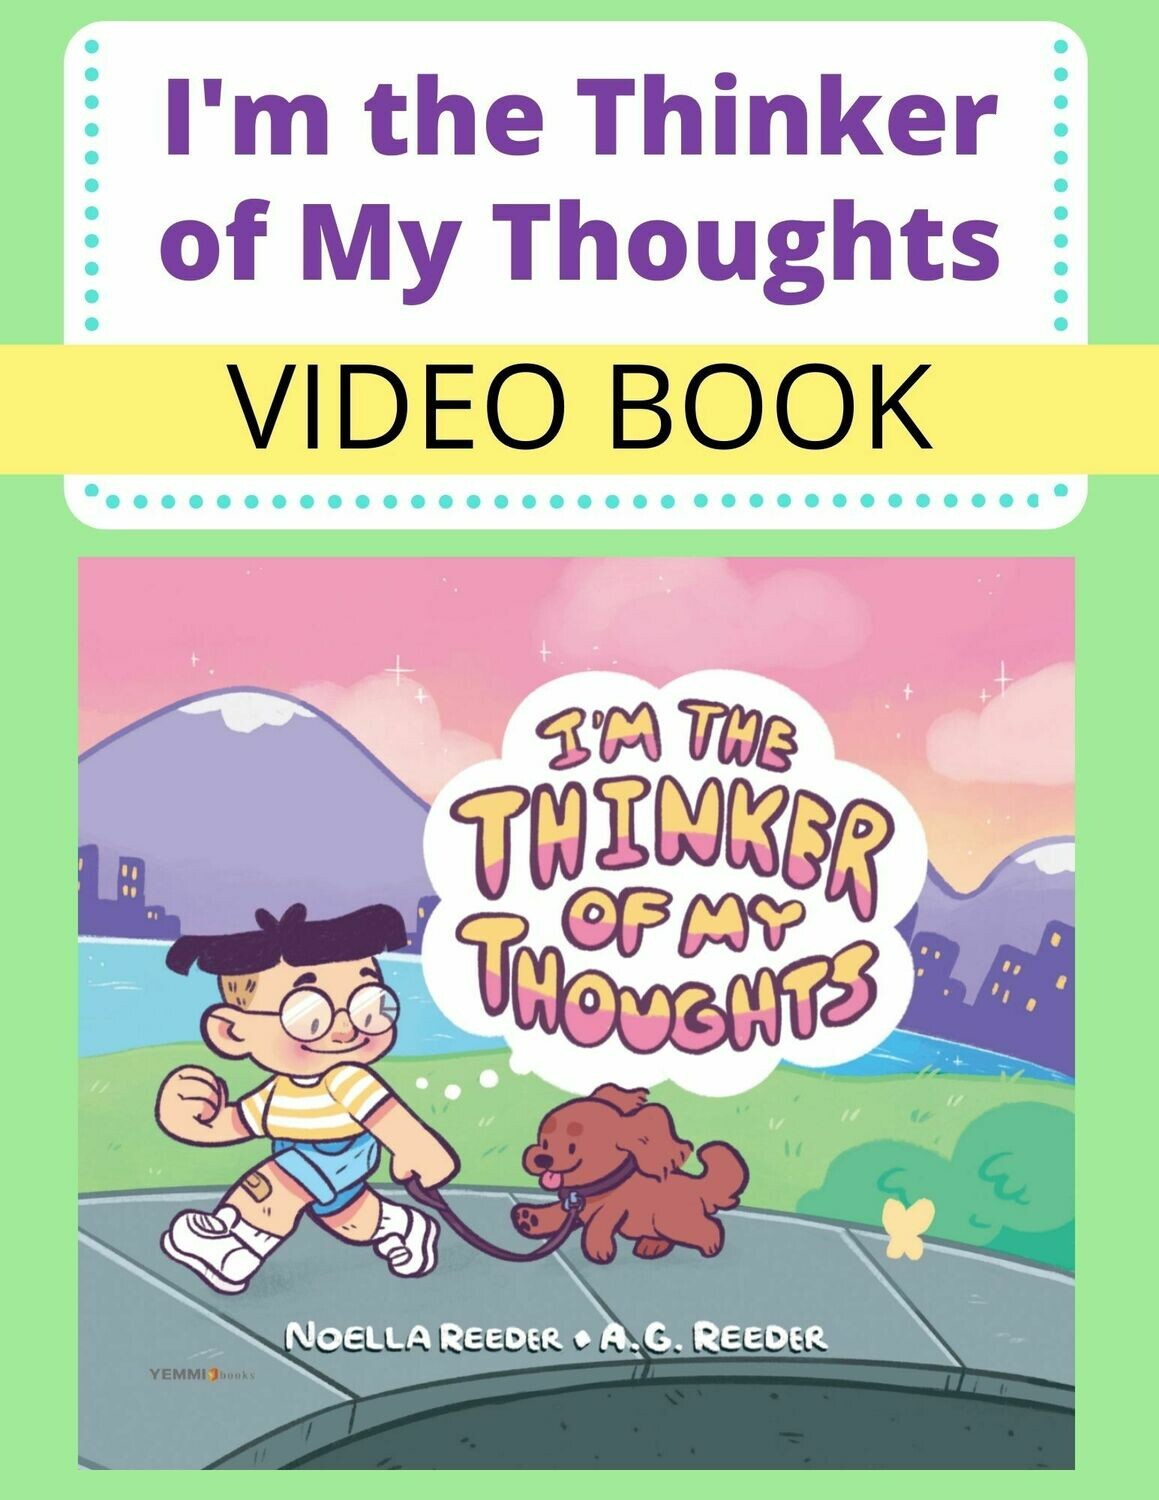 I'm the Thinker of My Thoughts VIDEOBOOK